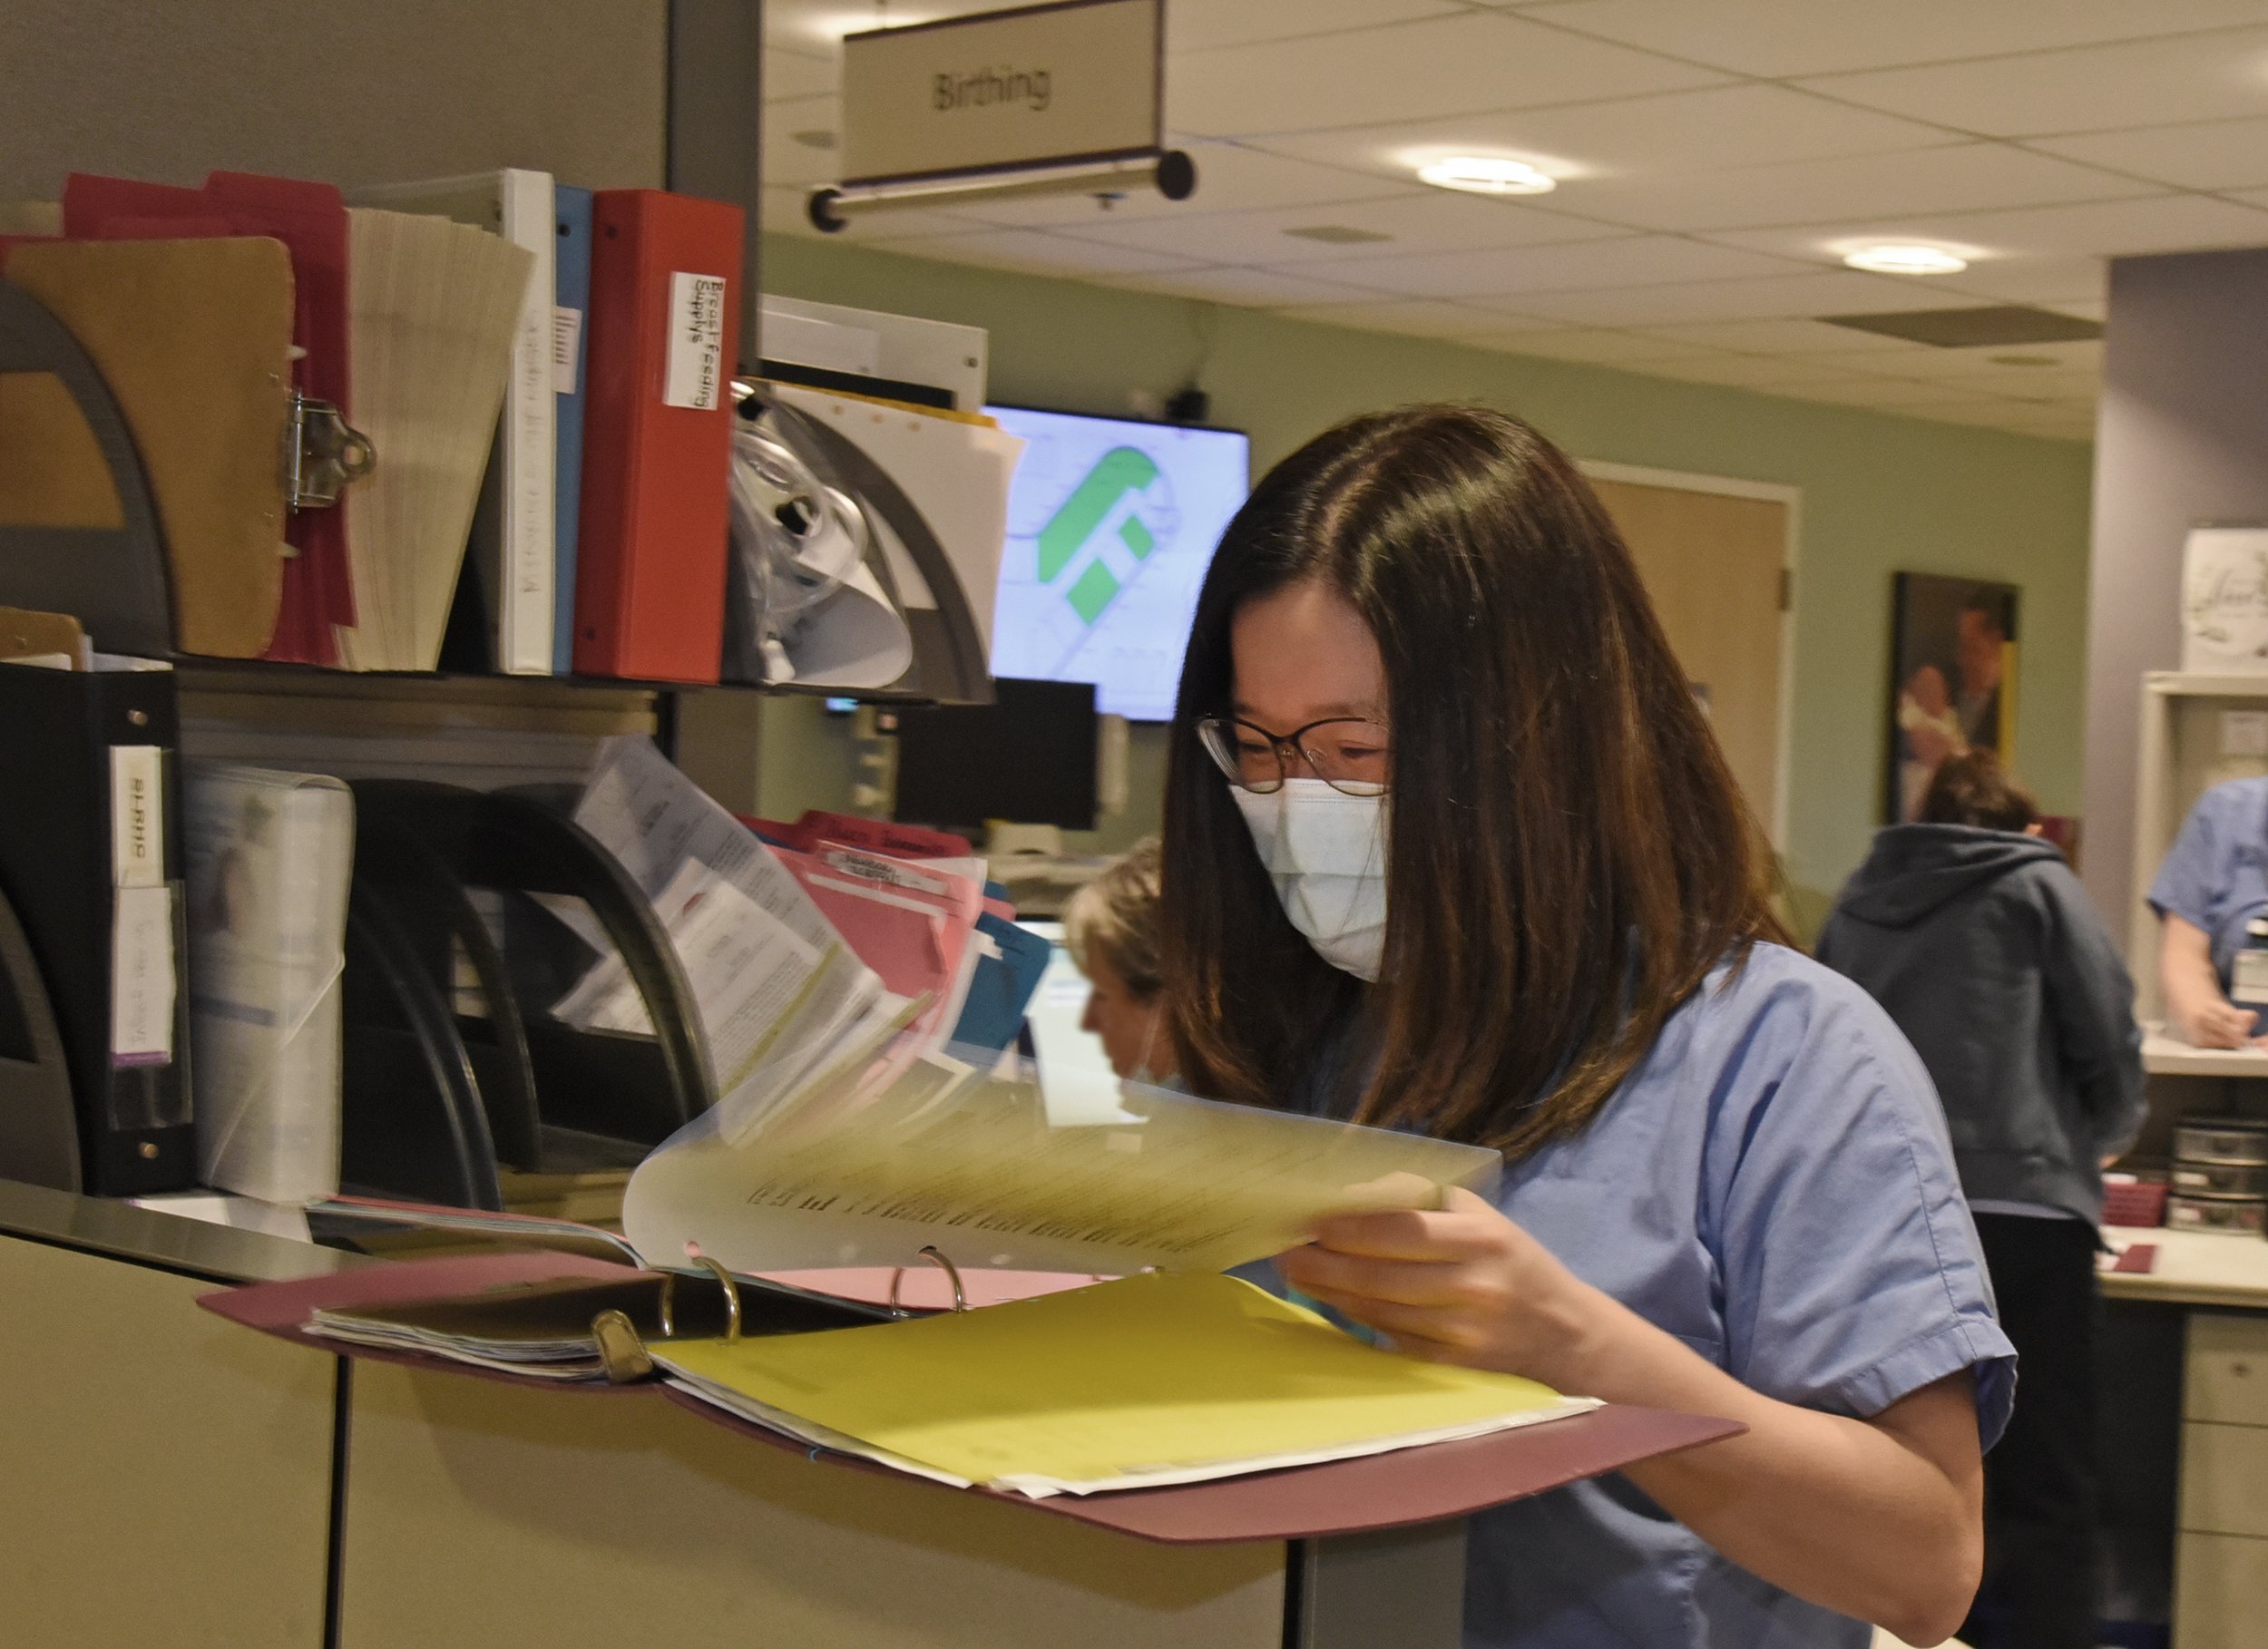 A woman wearing medical scrubs looks through a binder of documents